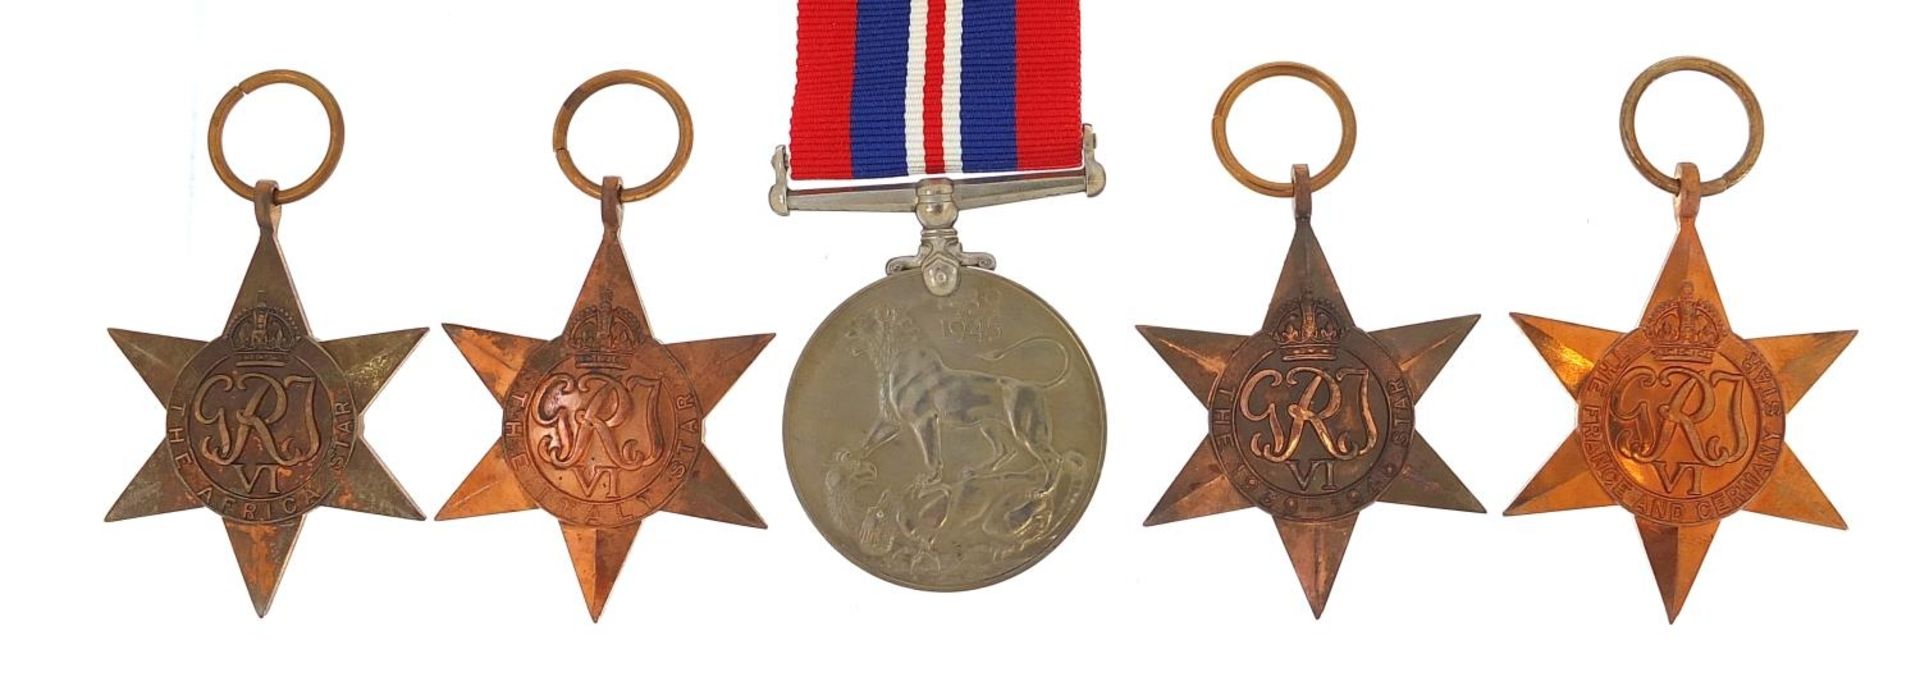 Four British military World War II medals with box of issue inscribed Mr T J Couston - Image 2 of 6